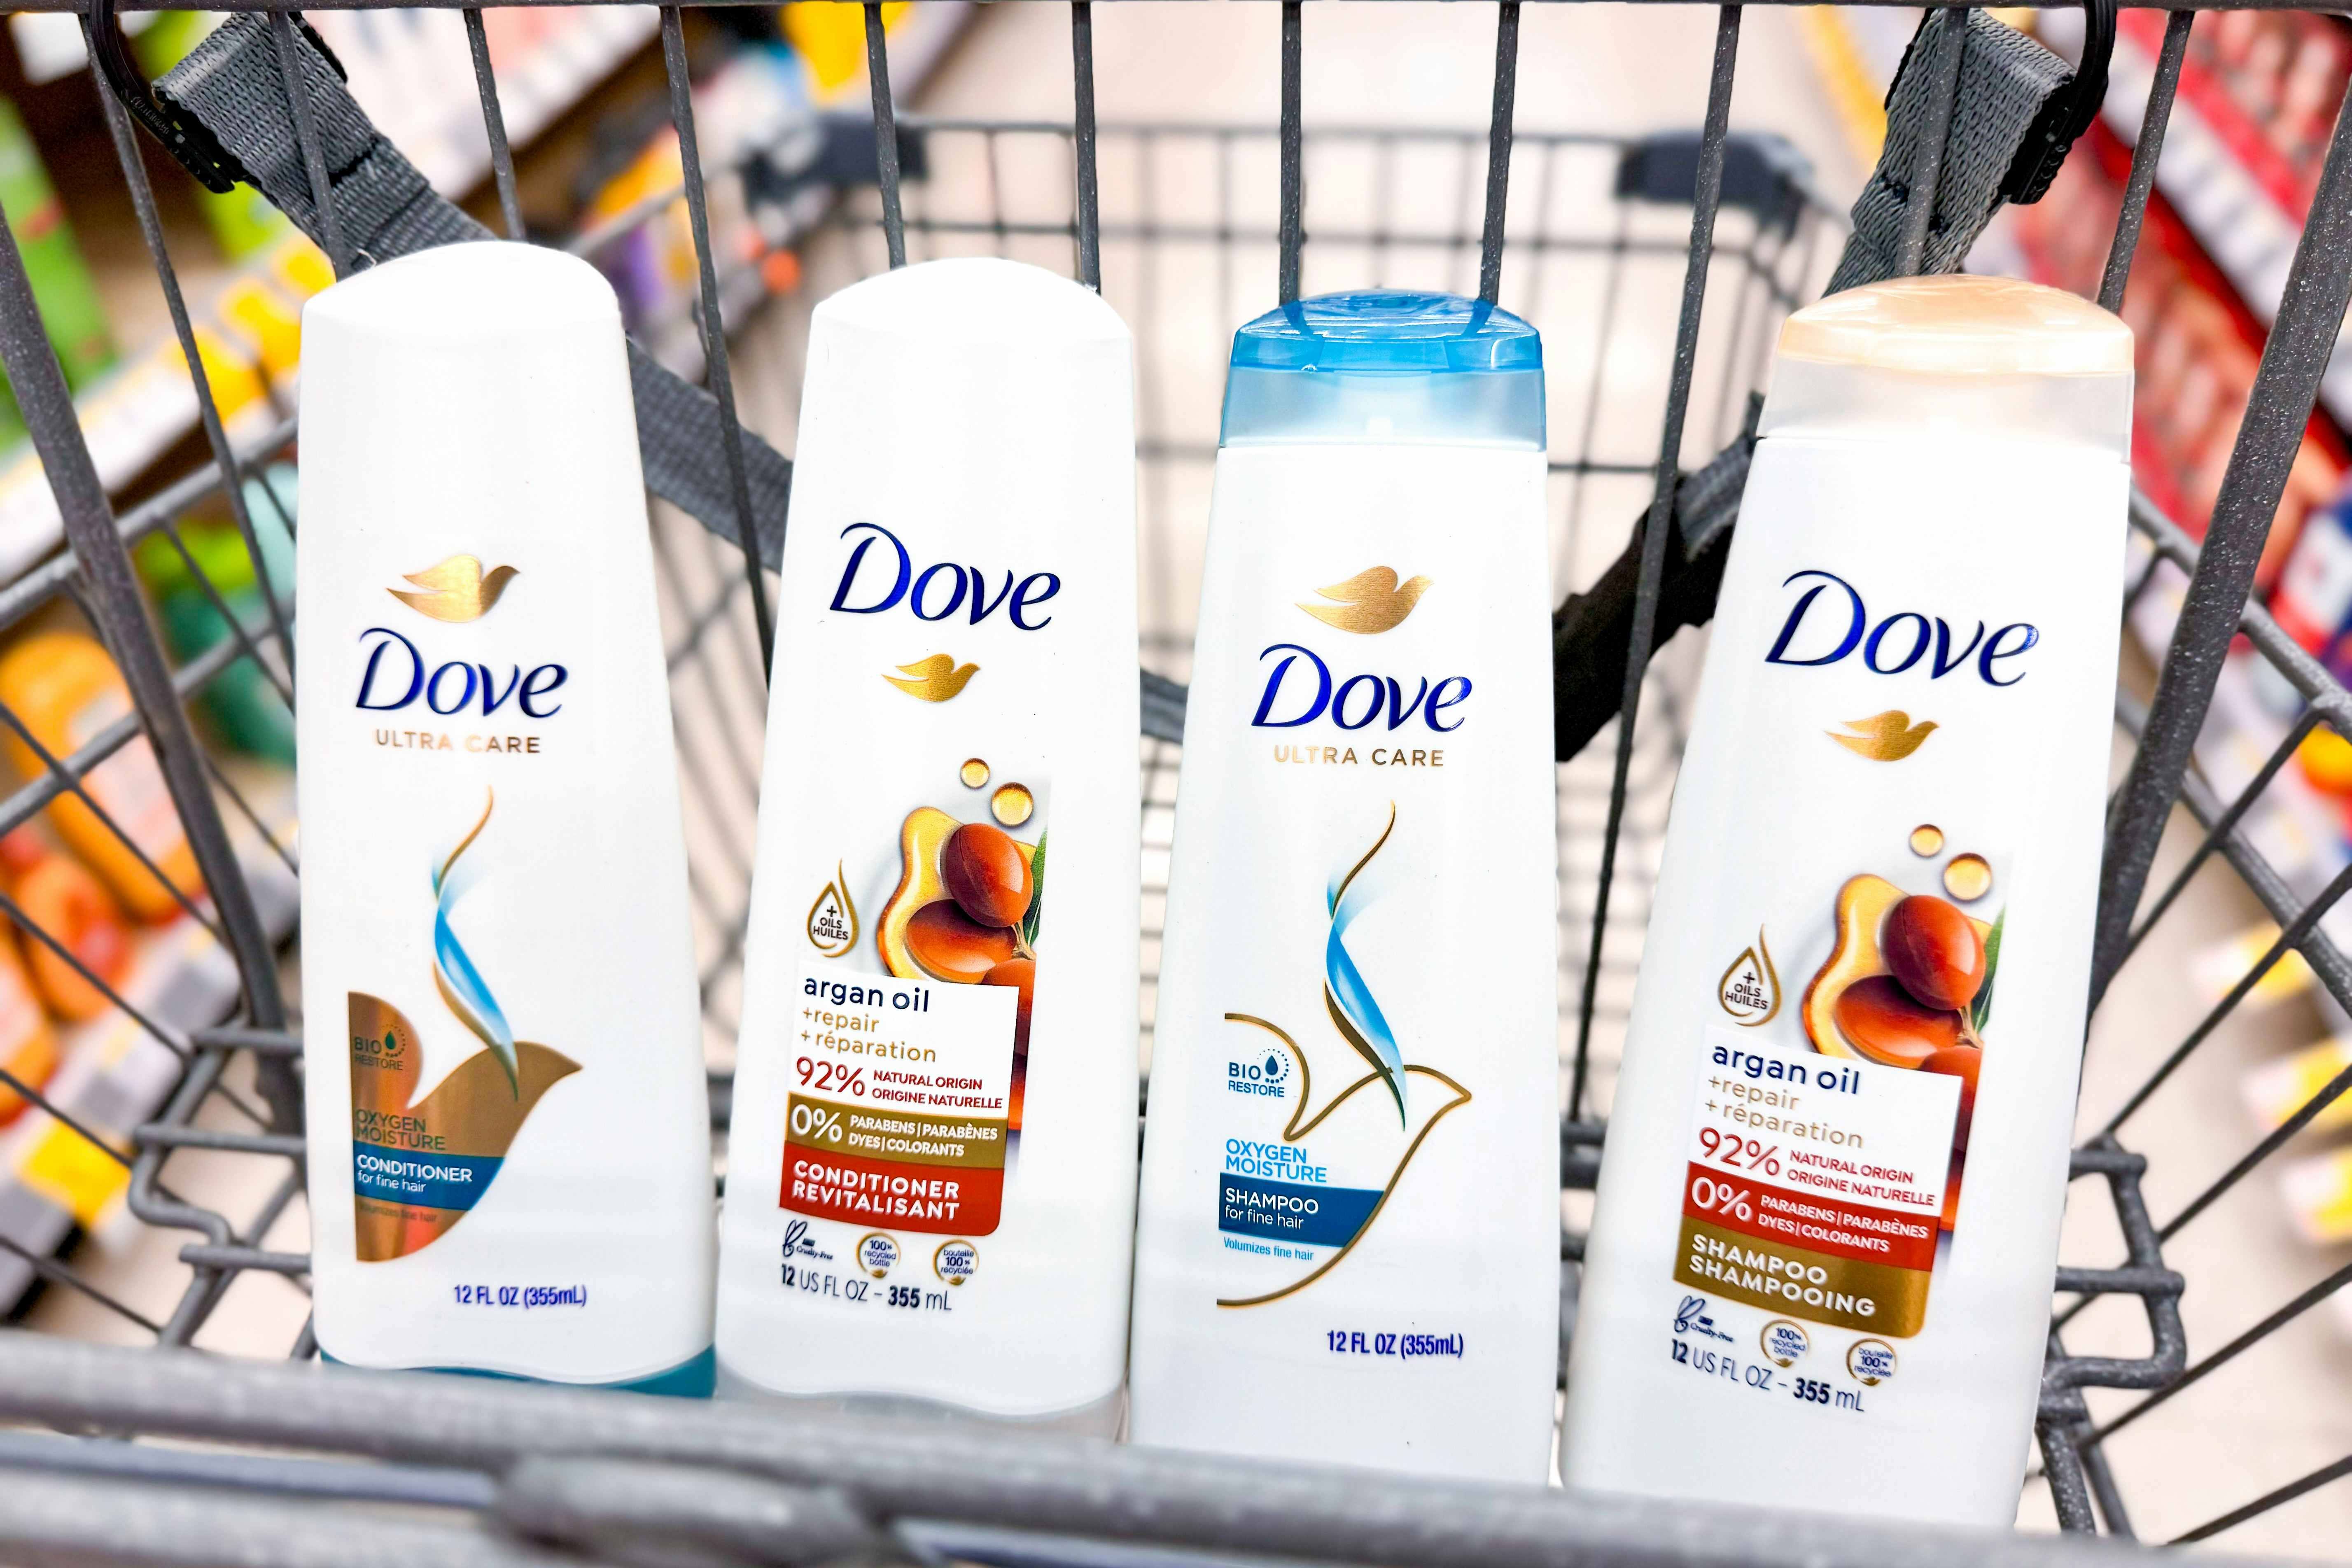 Free Dove Hair Care at Walgreens — Plus, Get $2 Back